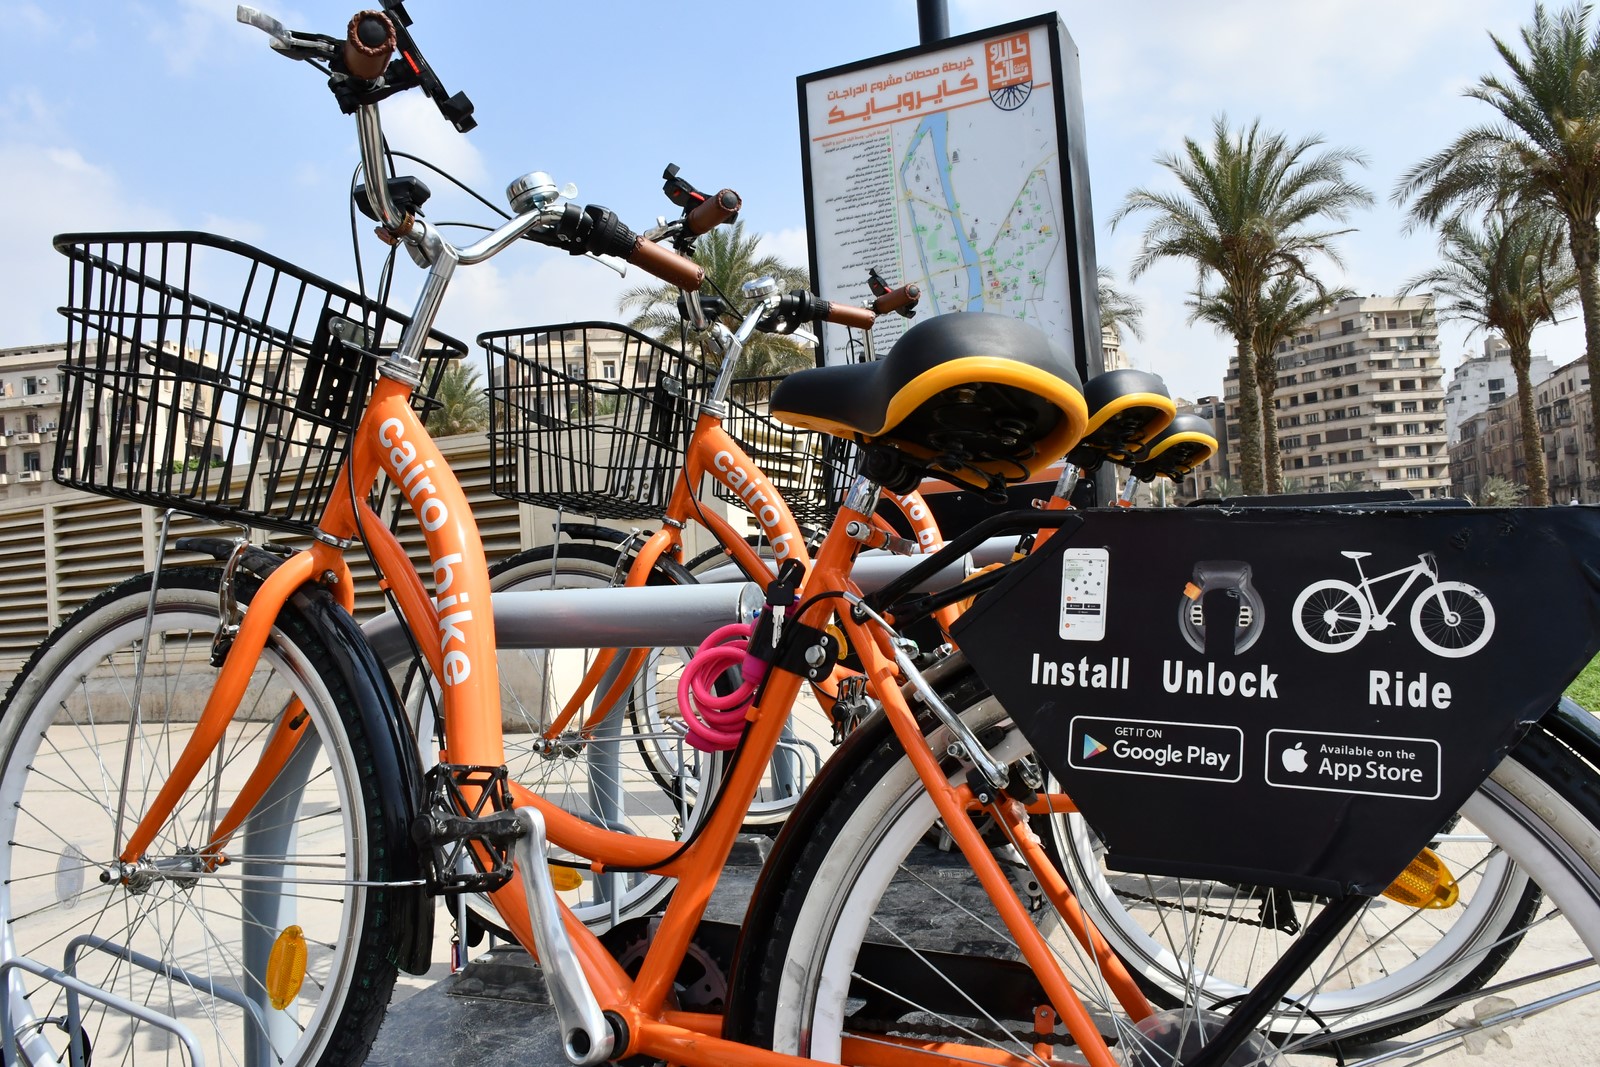 With the Launch of Cairo’s Bikeshare, Cycling Gains Momentum In Africa